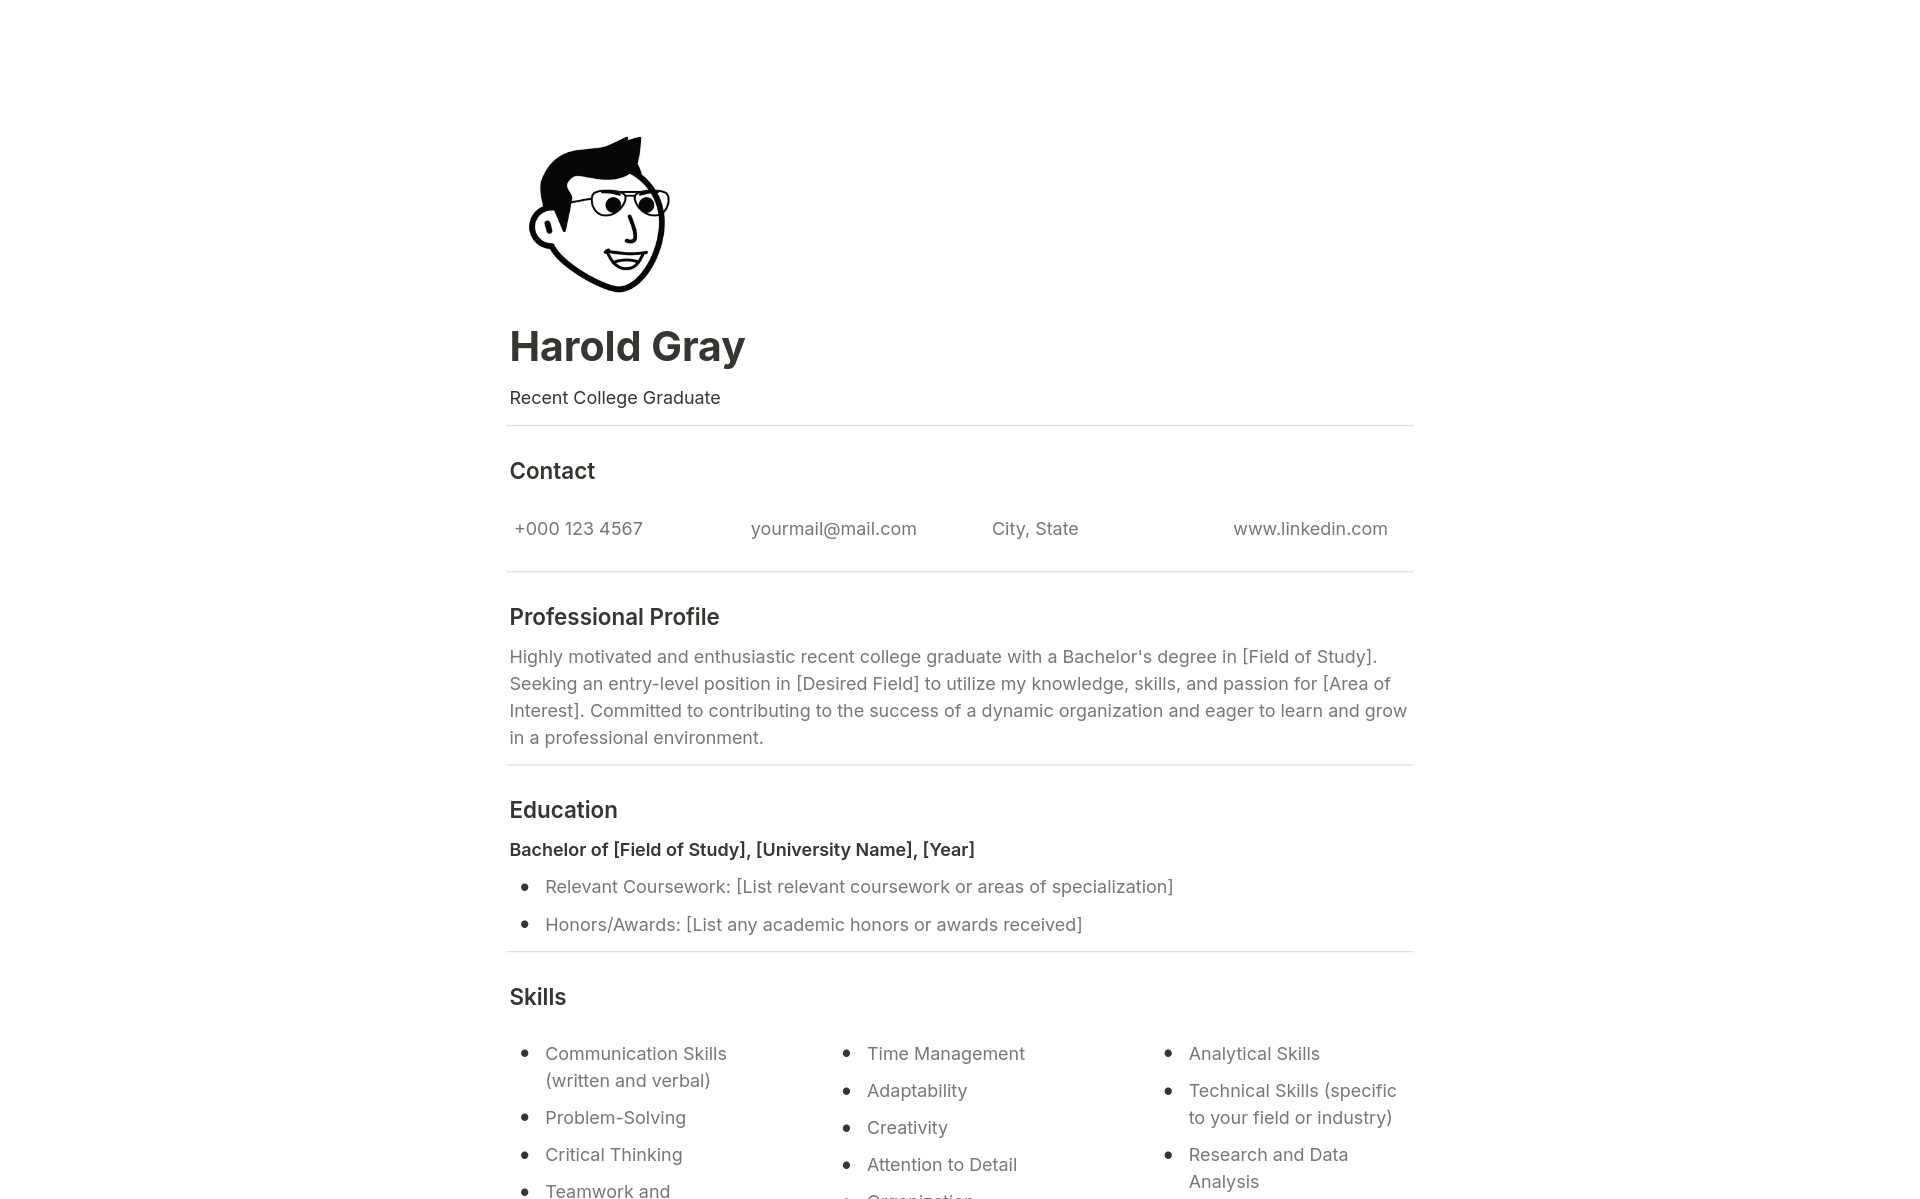 Attention recent college grads! Kickstart your career journey with this free Notion resume template.